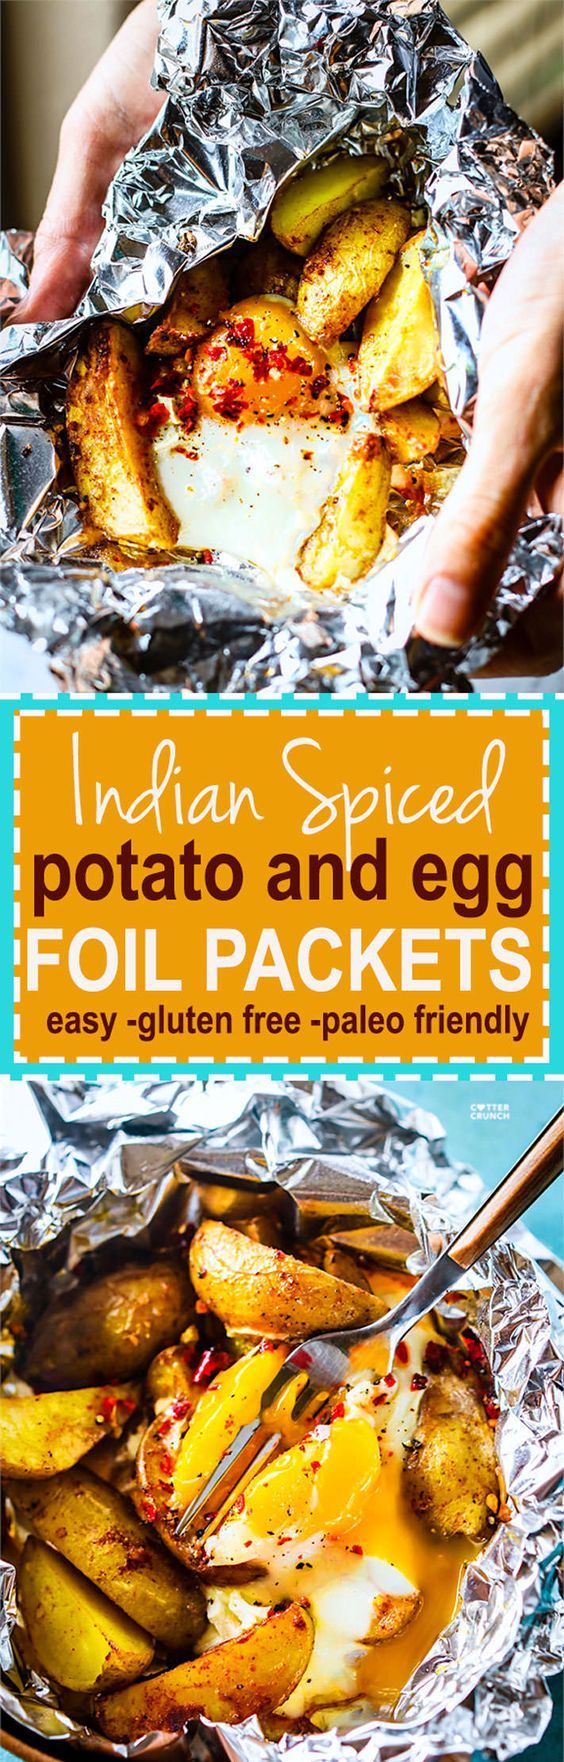 Indian spiced potato and egg foil packets easy gluten free paleo friendly